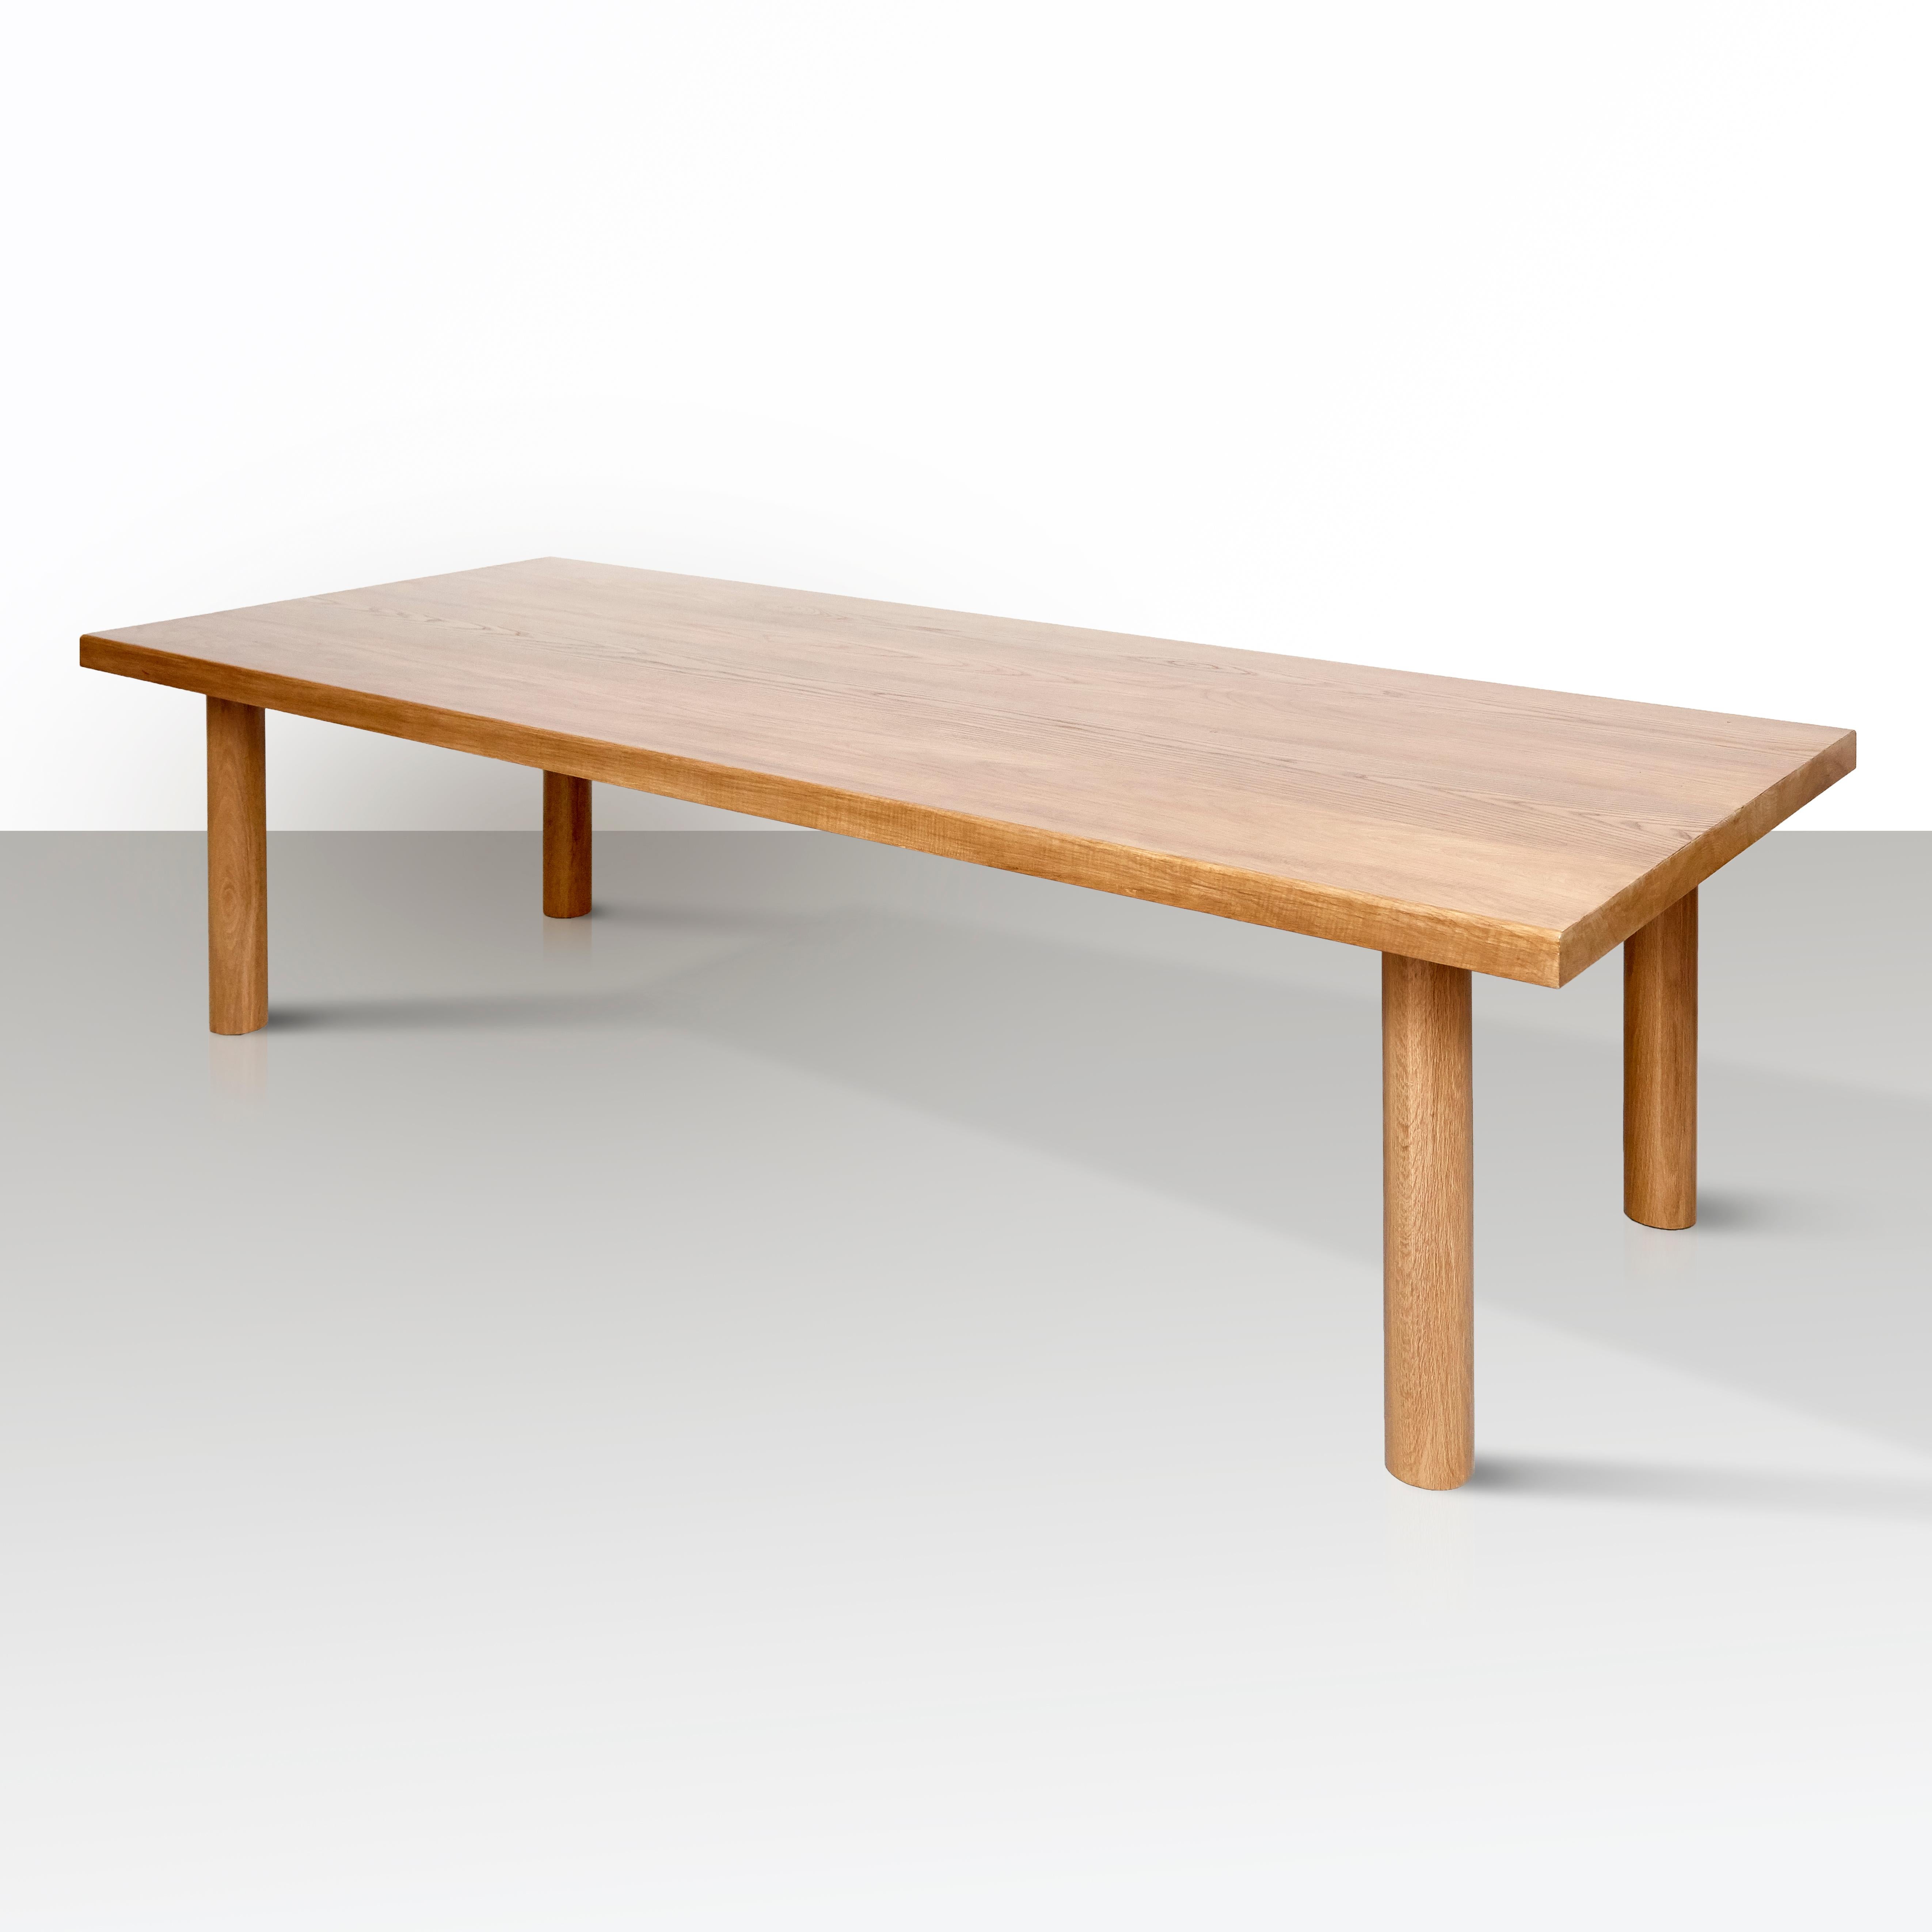 Spanish Dada Est. Contemporary Solid Ash Large Dining Table For Sale